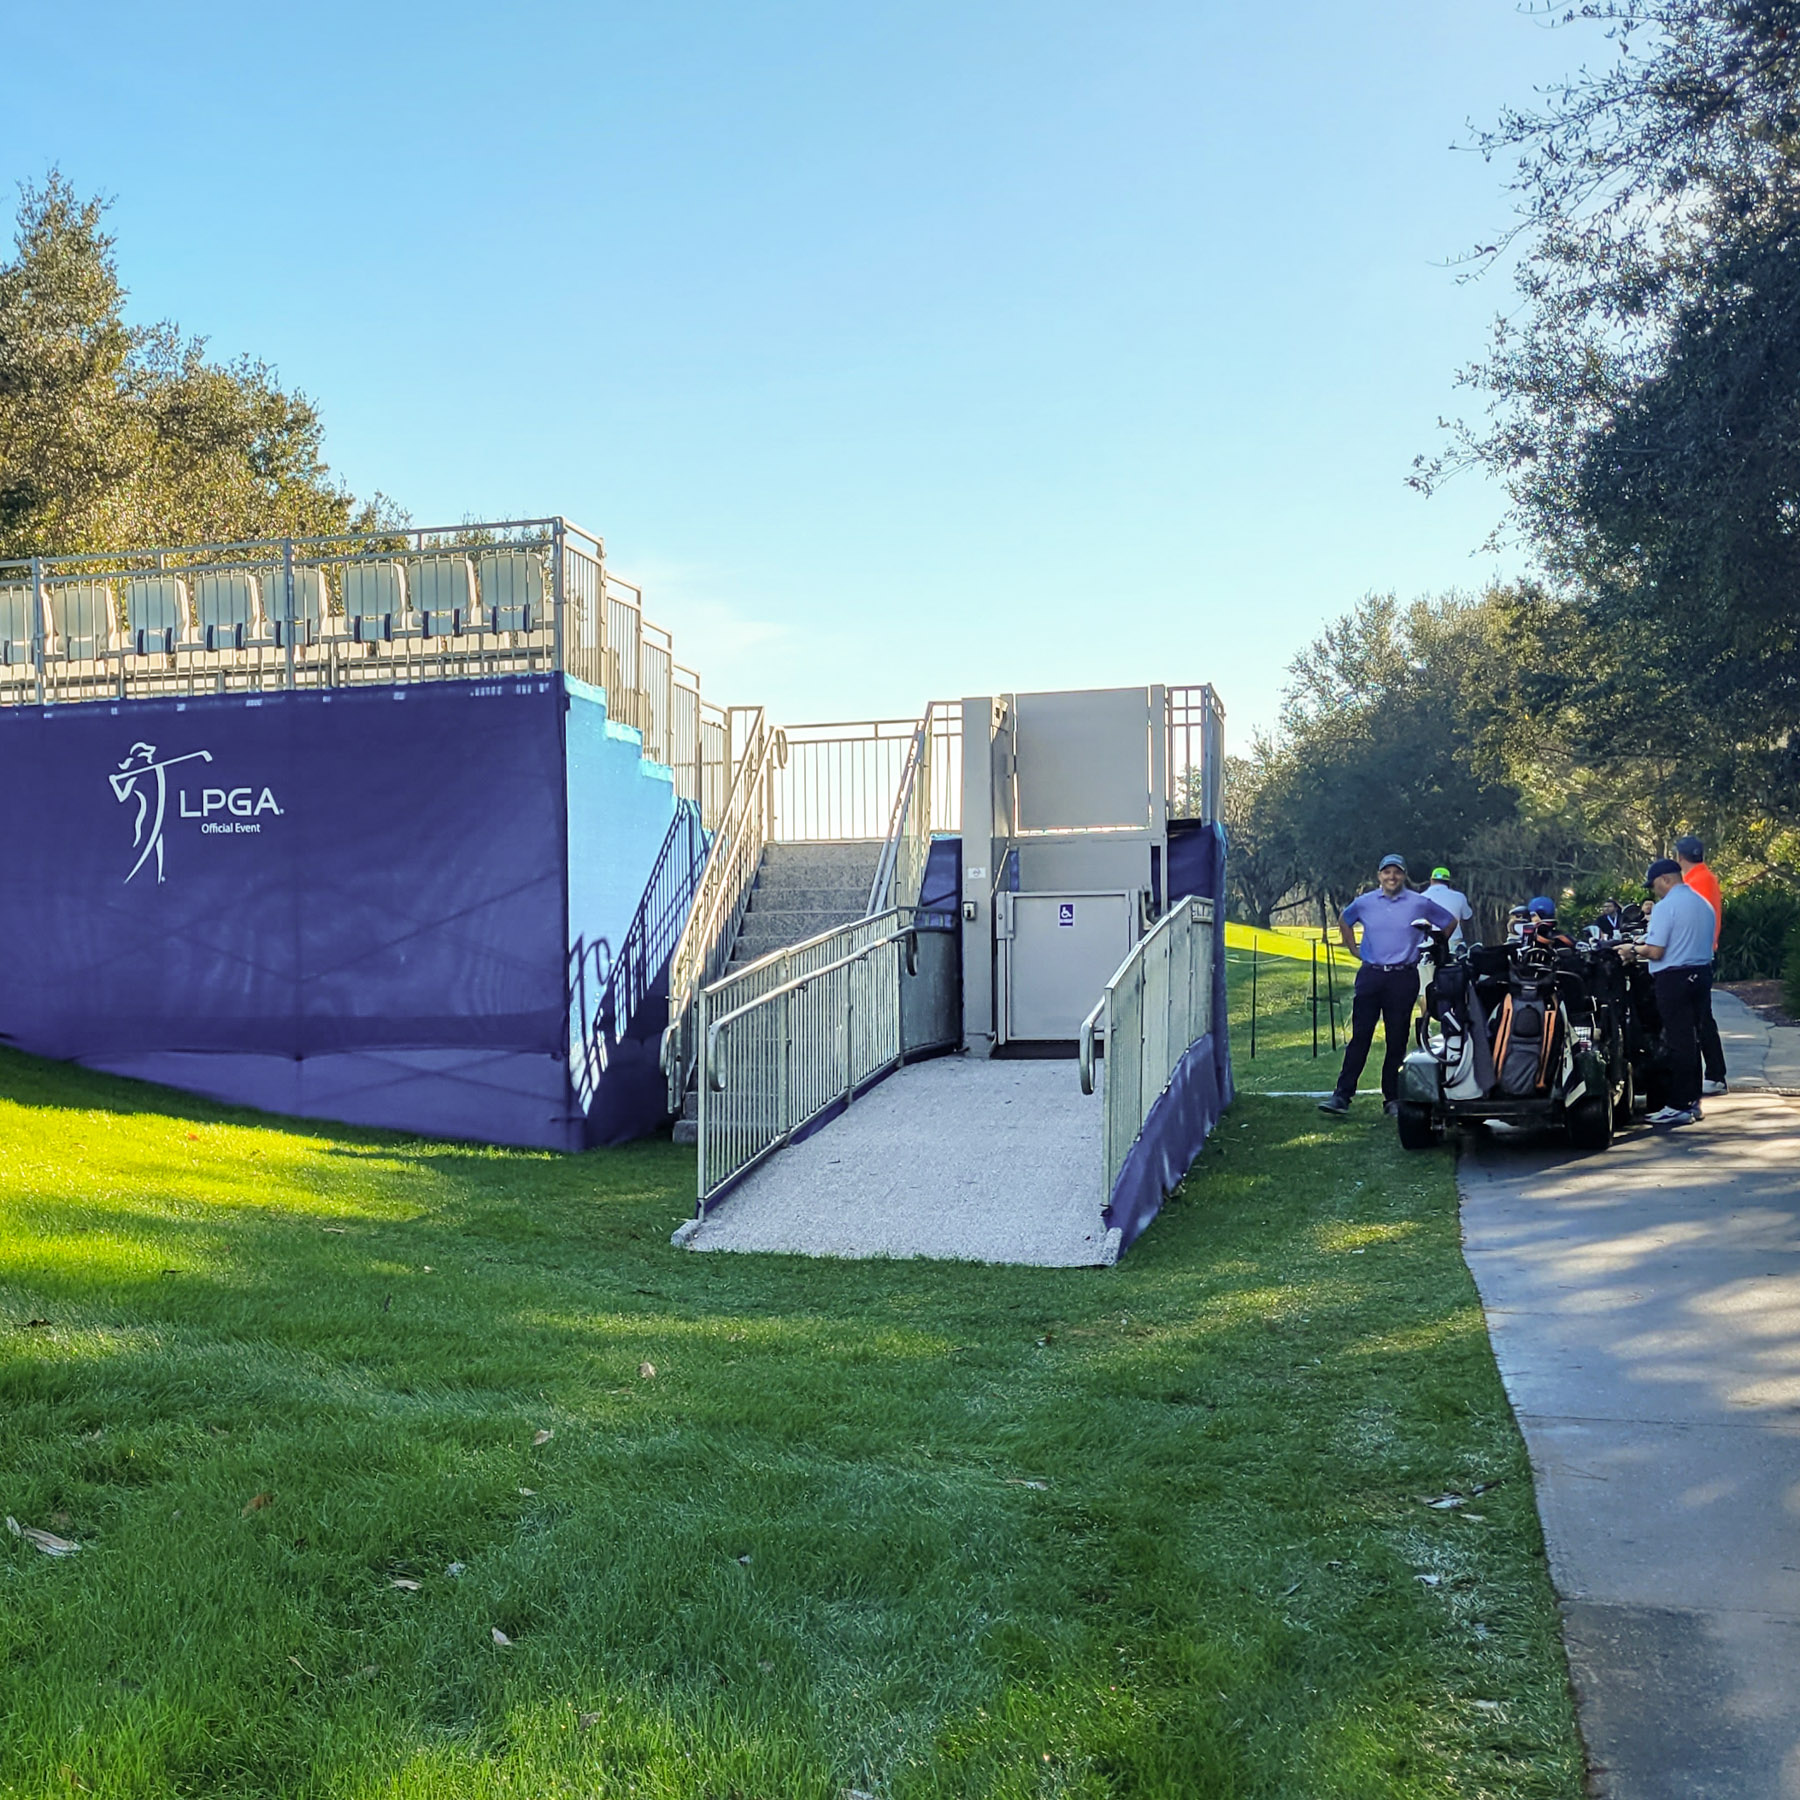 6' ADA Lift Rental at the Hilton Grand Vacations Tournament of Champions. LPGA logo on the blue covering of the hospitality structure.